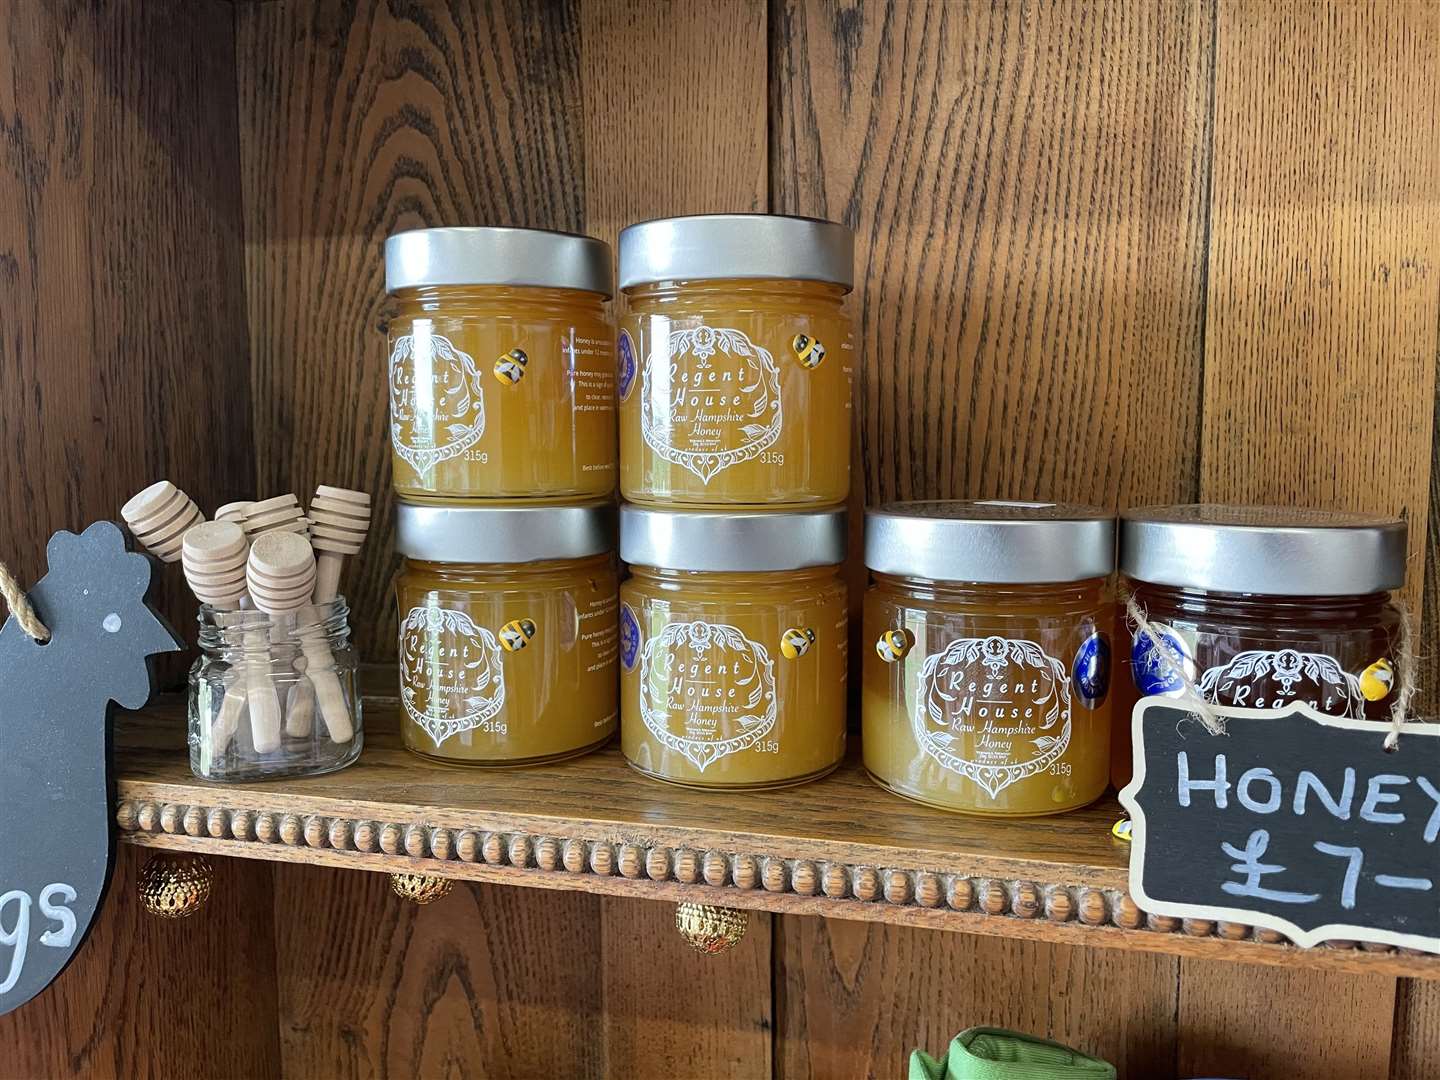 A dose of local honey a day might help, suggests some sufferers